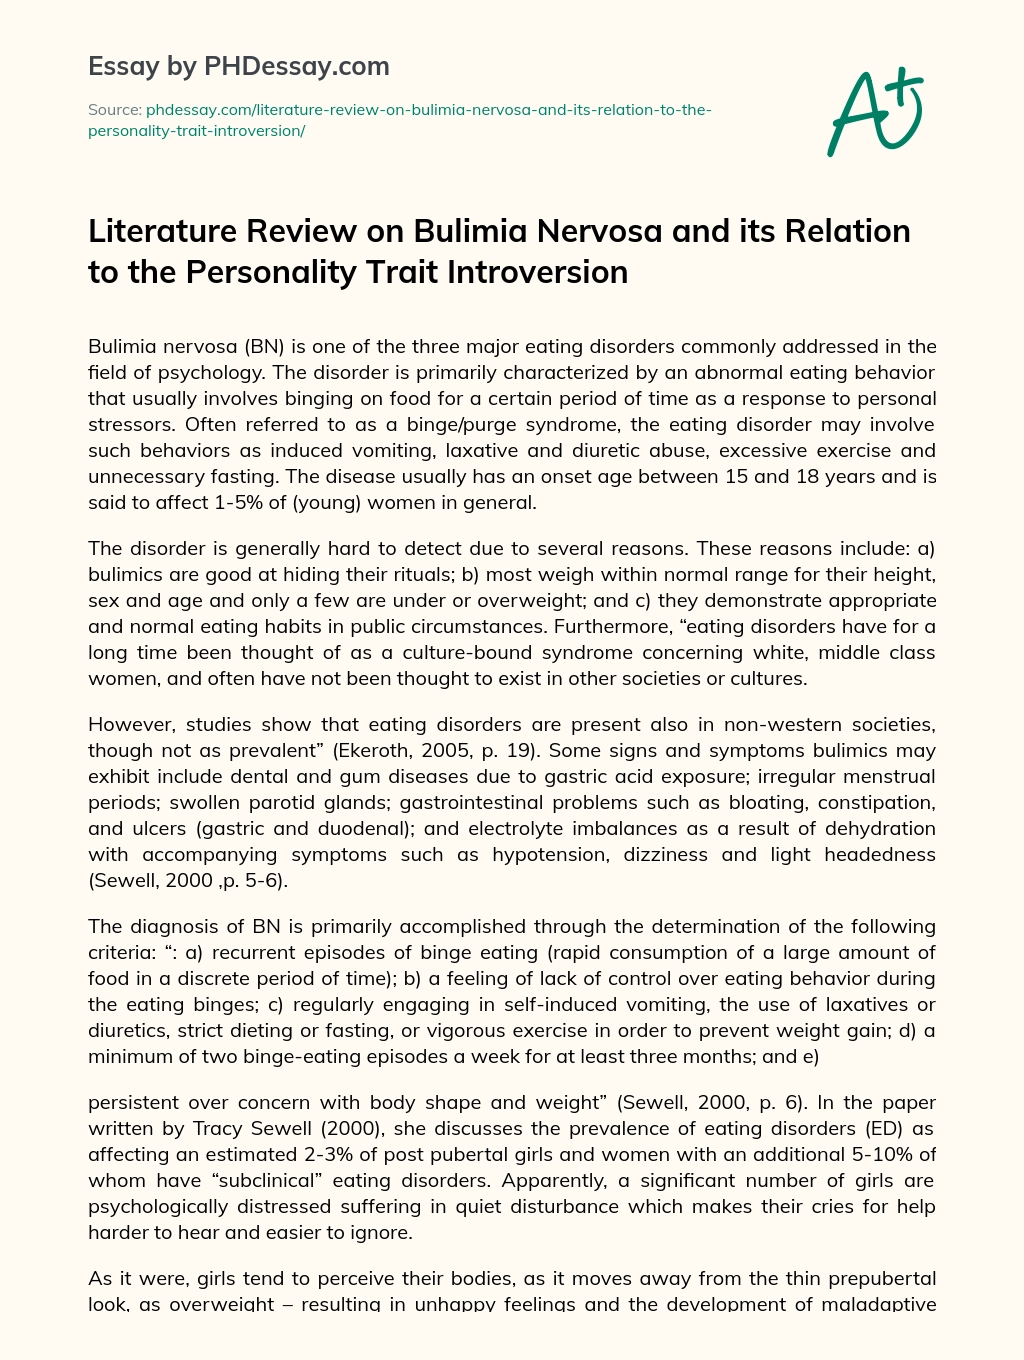 Literature Review on Bulimia Nervosa and its Relation to the Personality Trait Introversion essay